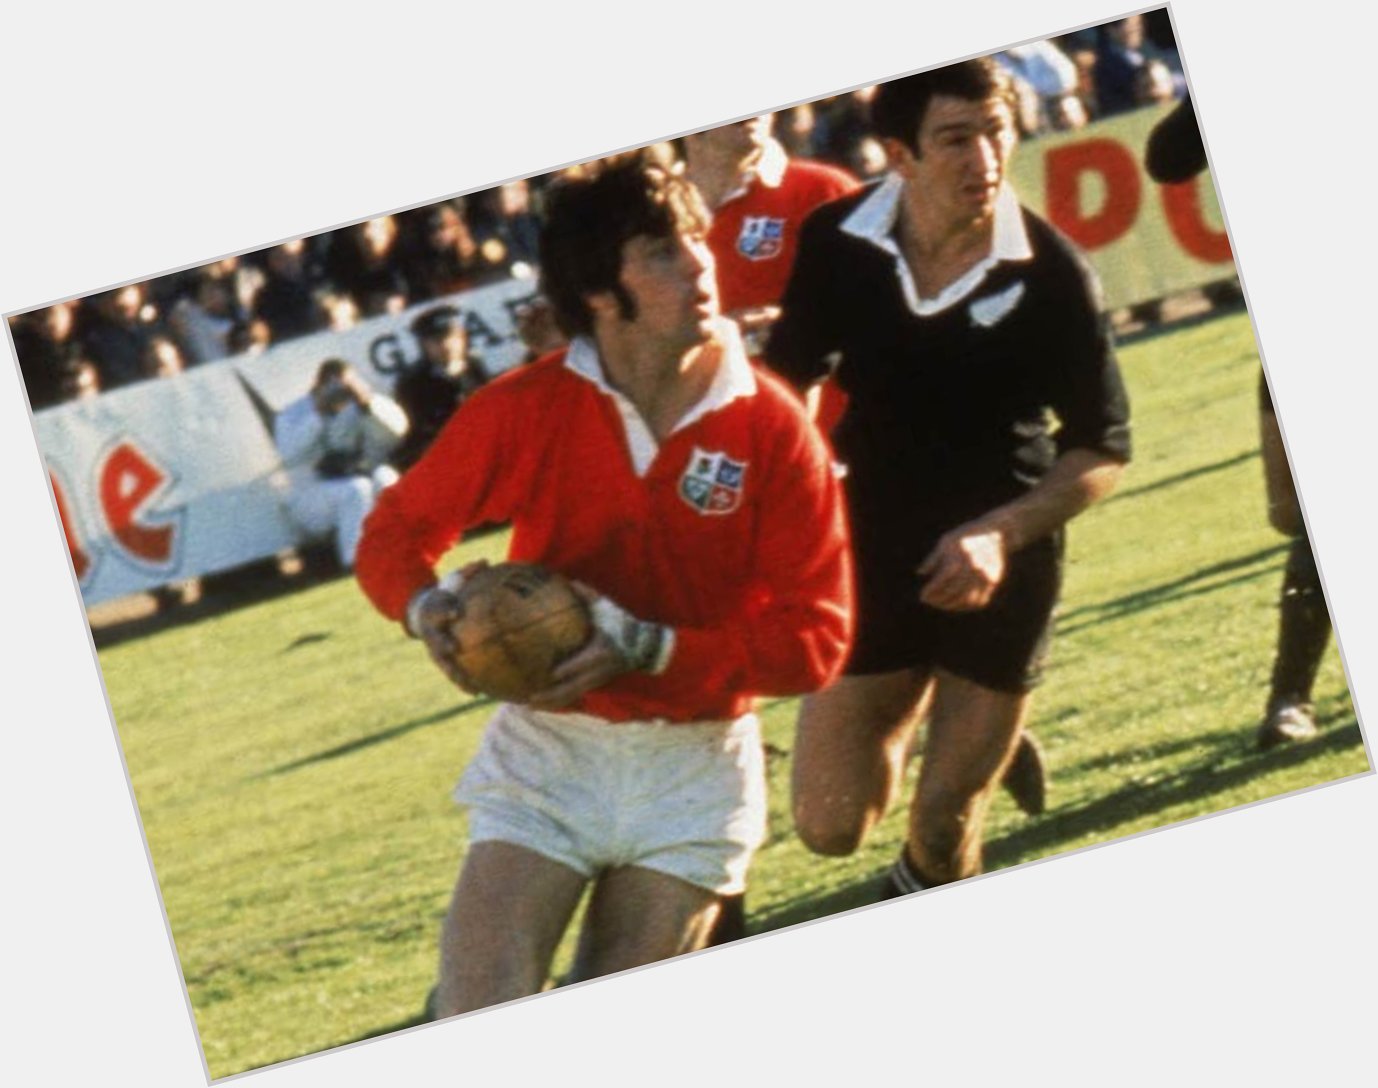 Happy 75th birthday to Barry John.

IMHO the greatest of all the great Welsh fly halves. 